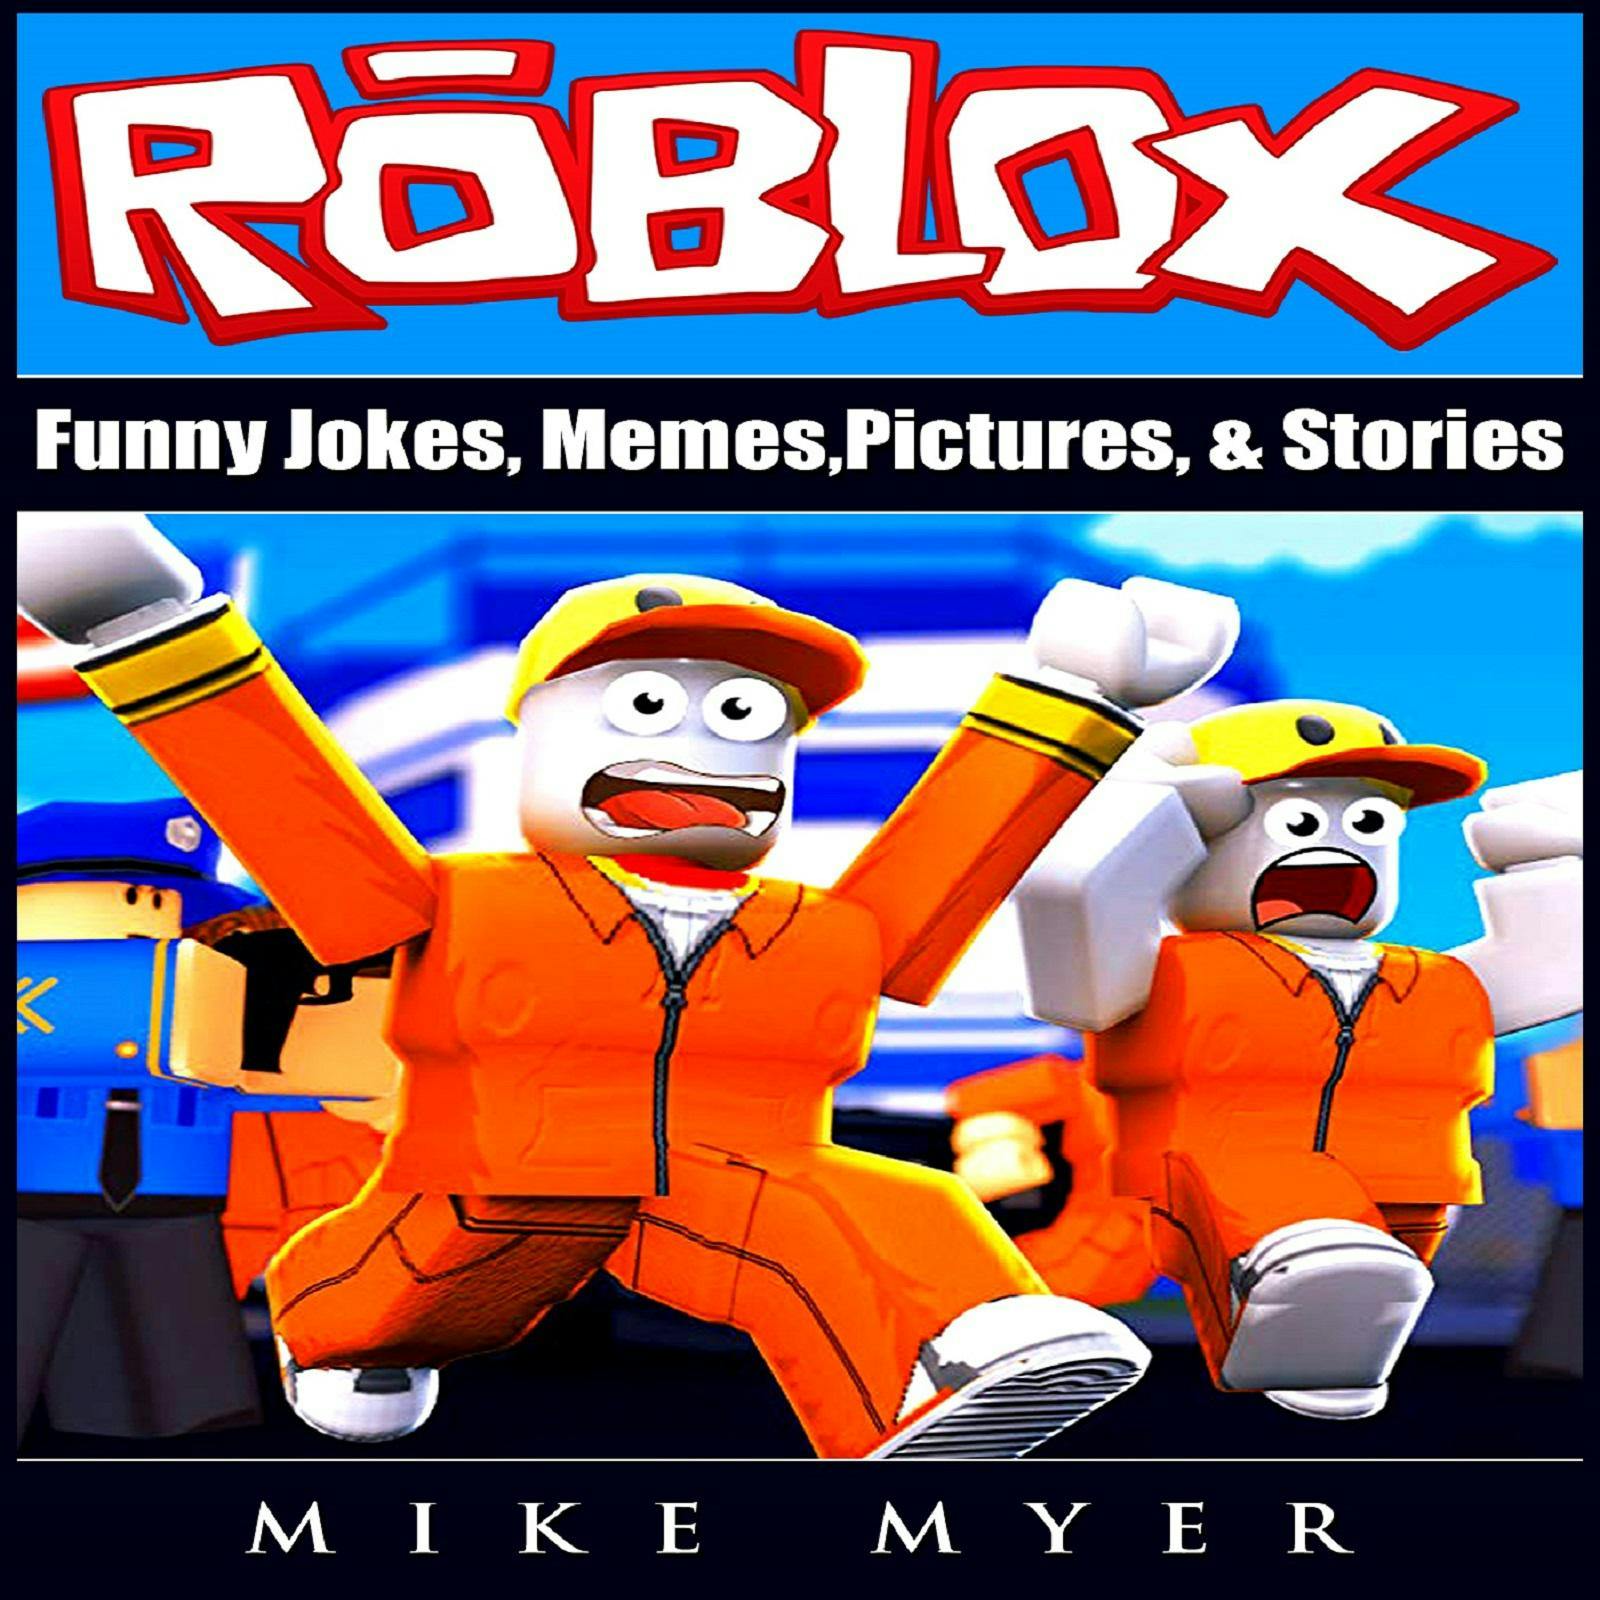 Roblox Funny Jokes, Memes, Pictures, & Stories - Mike Myer